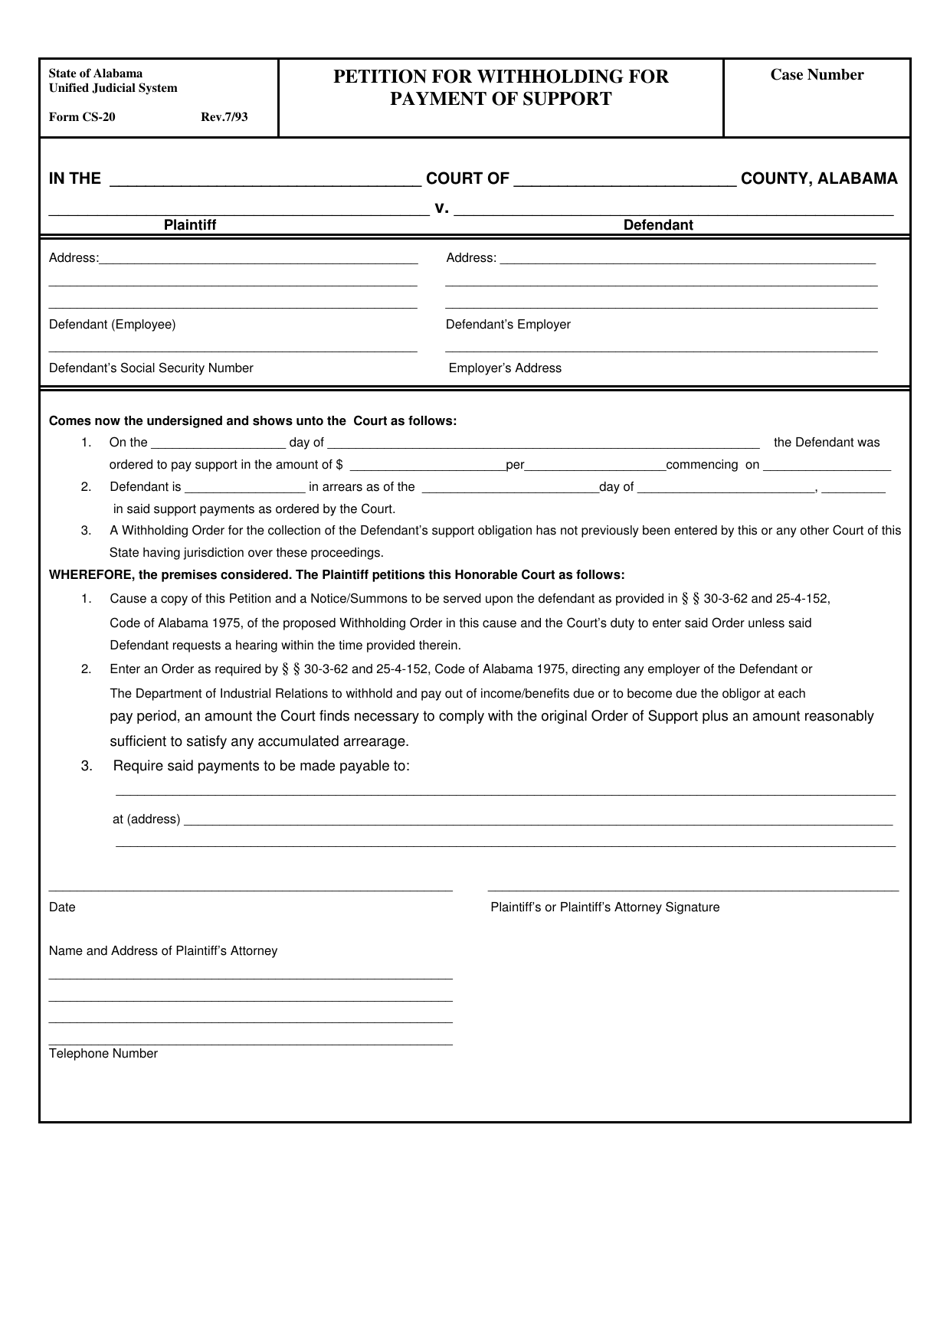 Form CS-20 Petition for Withholding for Payment of Support - Alabama, Page 1